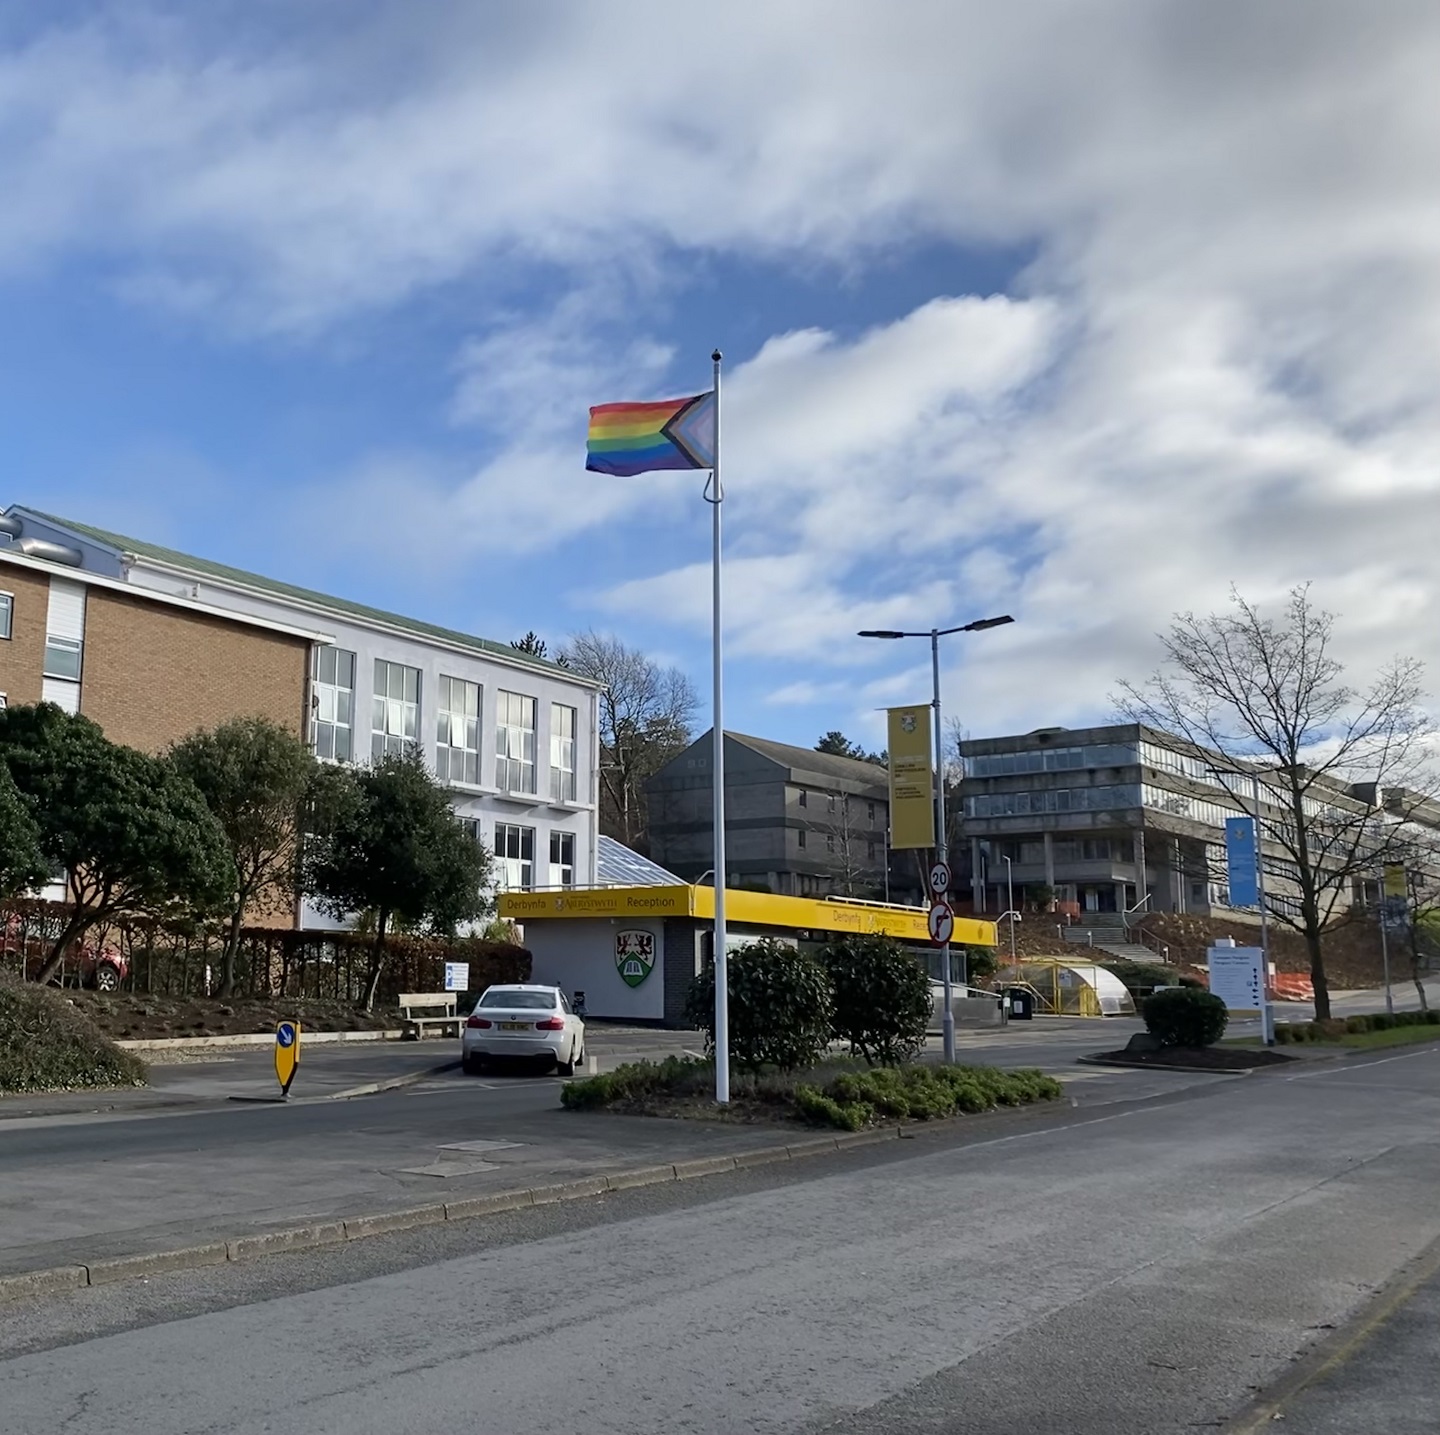 To mark this year’s LGBT History Month, Aberystwyth University has been flying the Intersectional Pride flag. In addition to the familiar rainbow colours, the flag features black and brown stripes to represent marginalised LGBT communities of colour, and pink, light blue and white used on the Transgender Pride Flag.